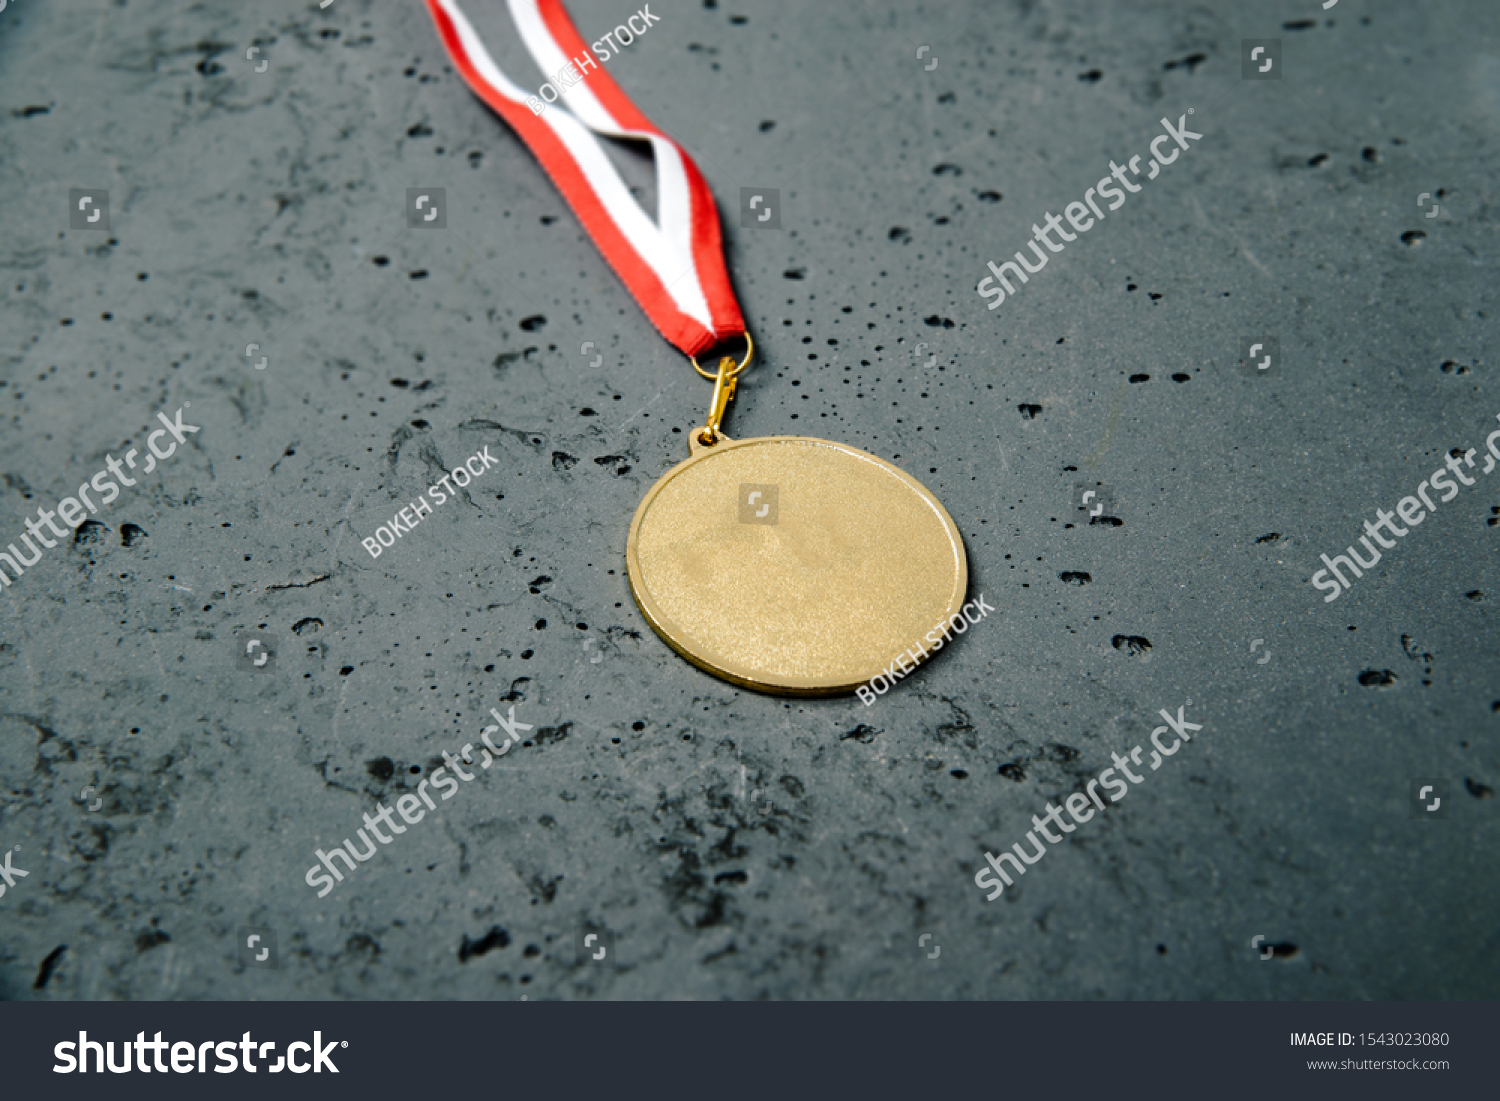 Gold Medal lie on a stone background. Gold medal on a dark background. The concept of tournaments and competitions. Victory, winning competitions. #1543023080